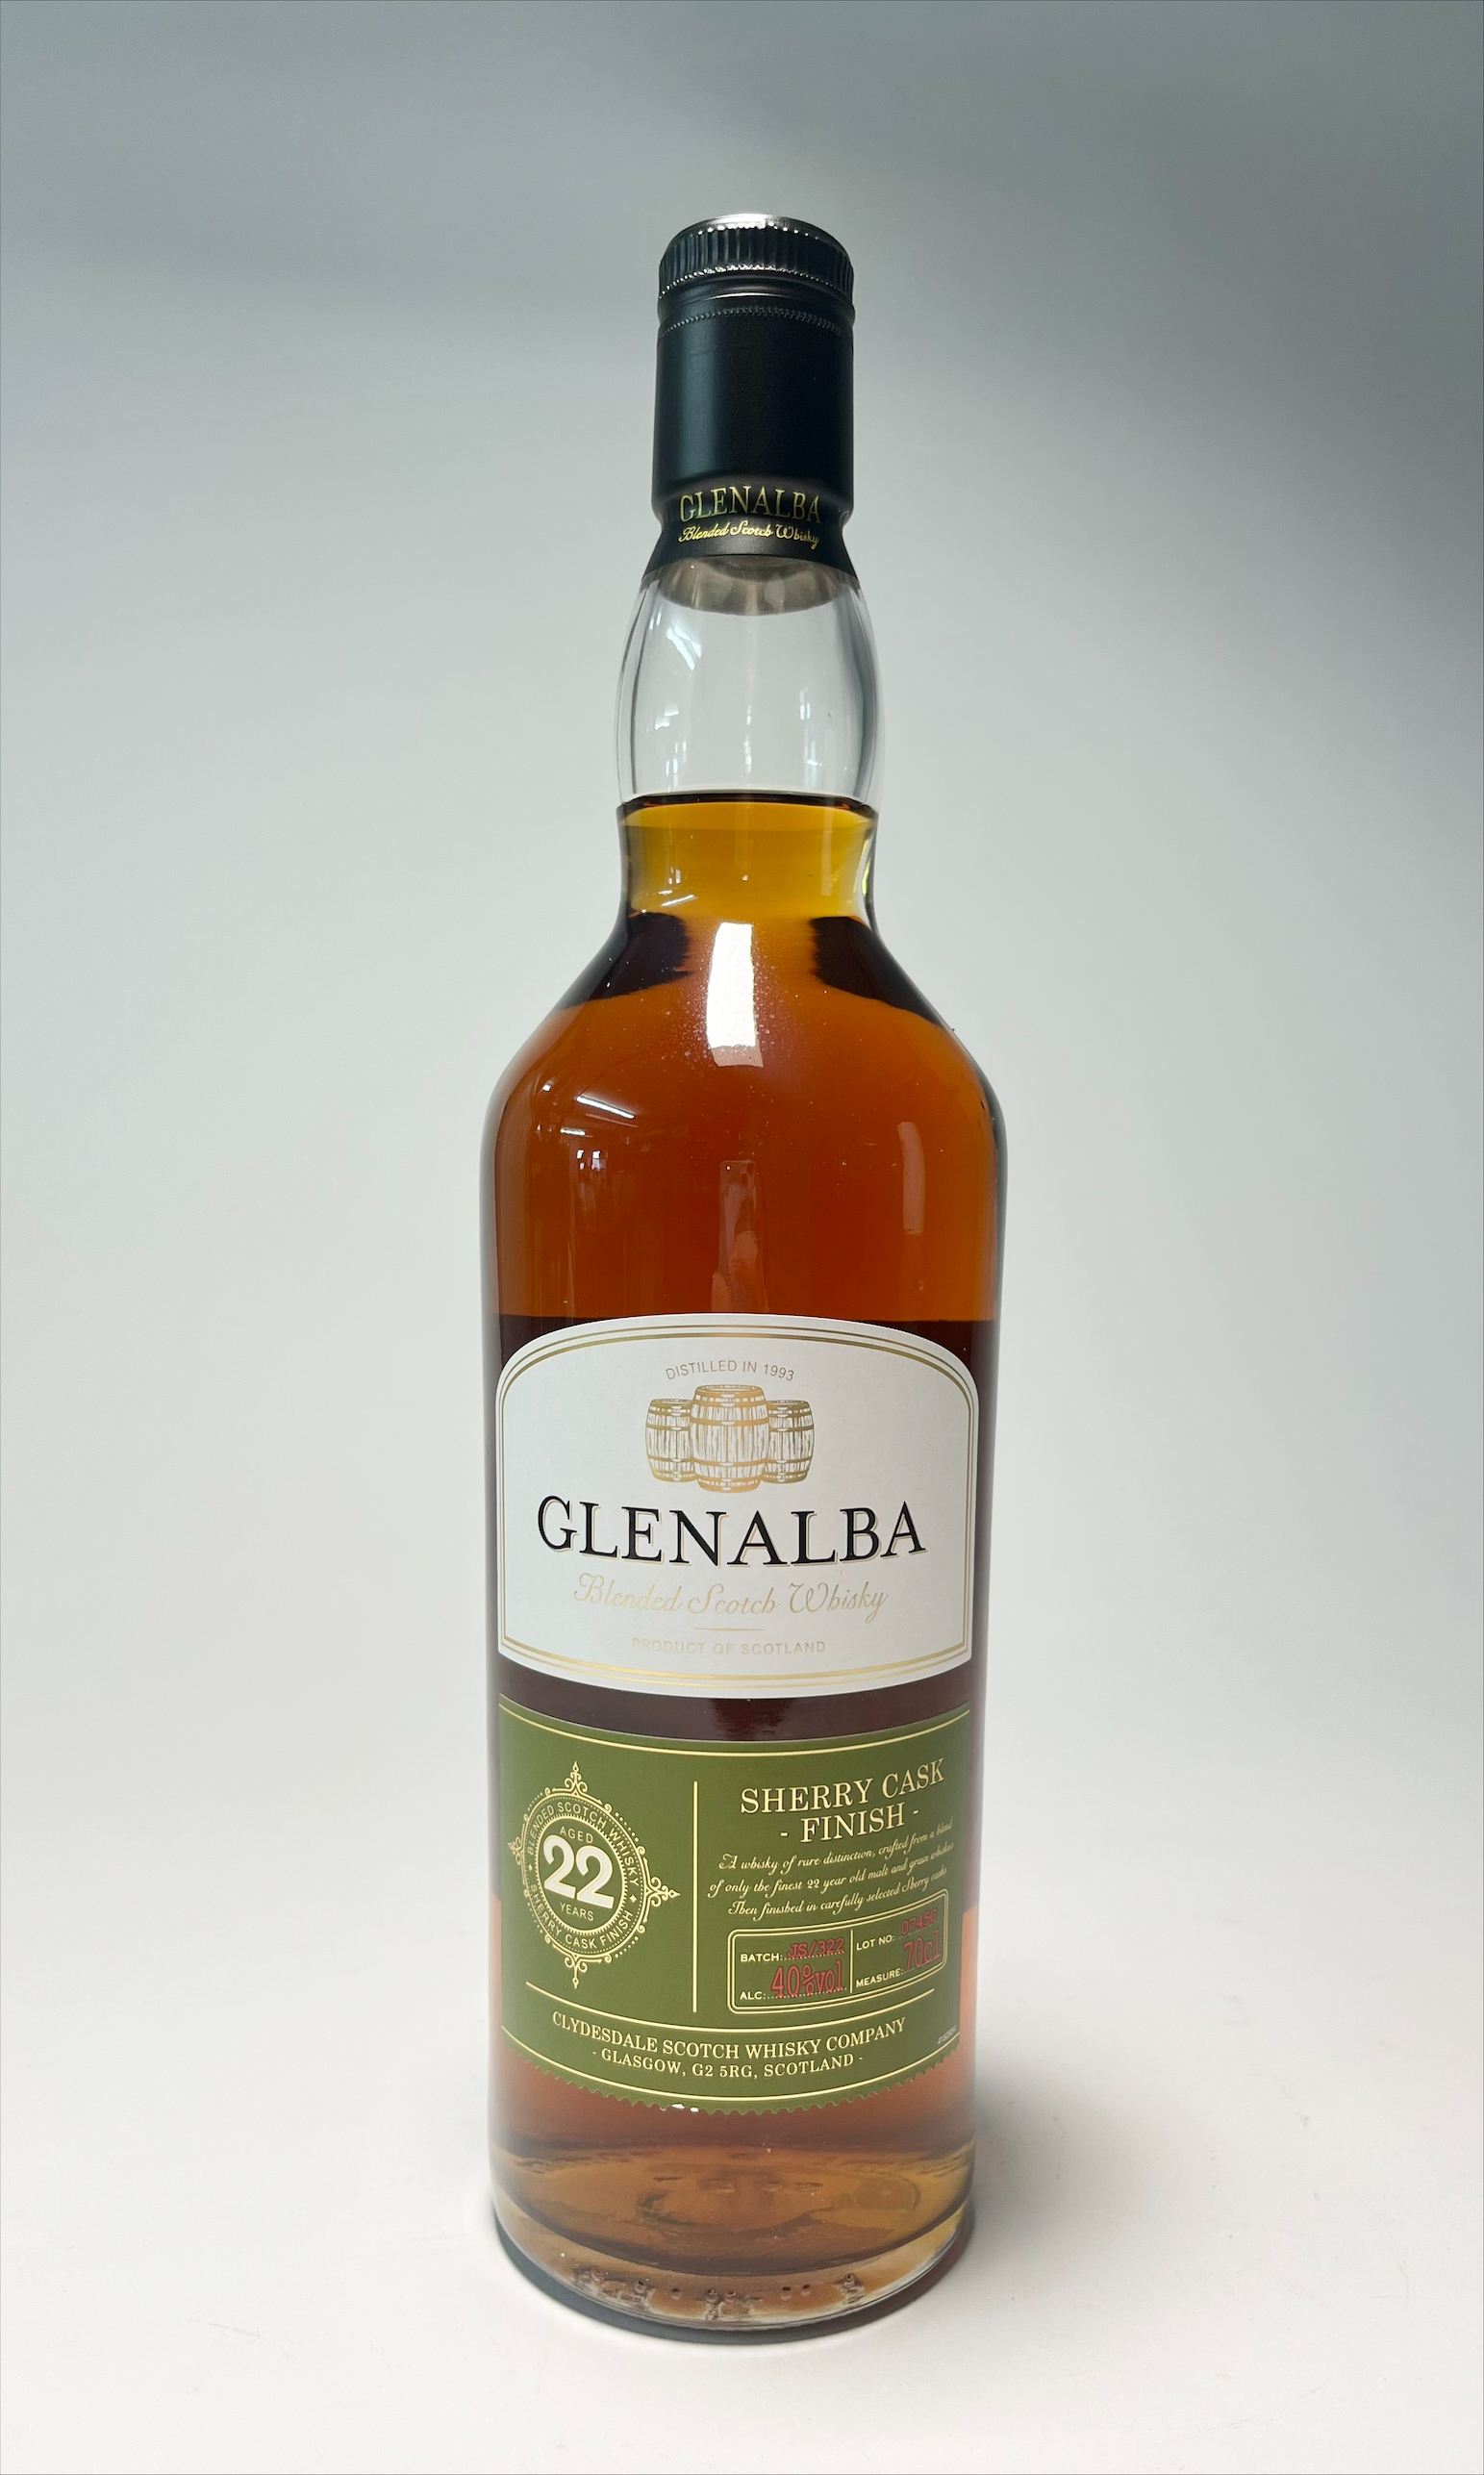 A bottle of Glenalba Blended Scotch Whisky, Sherry cask finish, aged 22 years, product of - Image 2 of 2